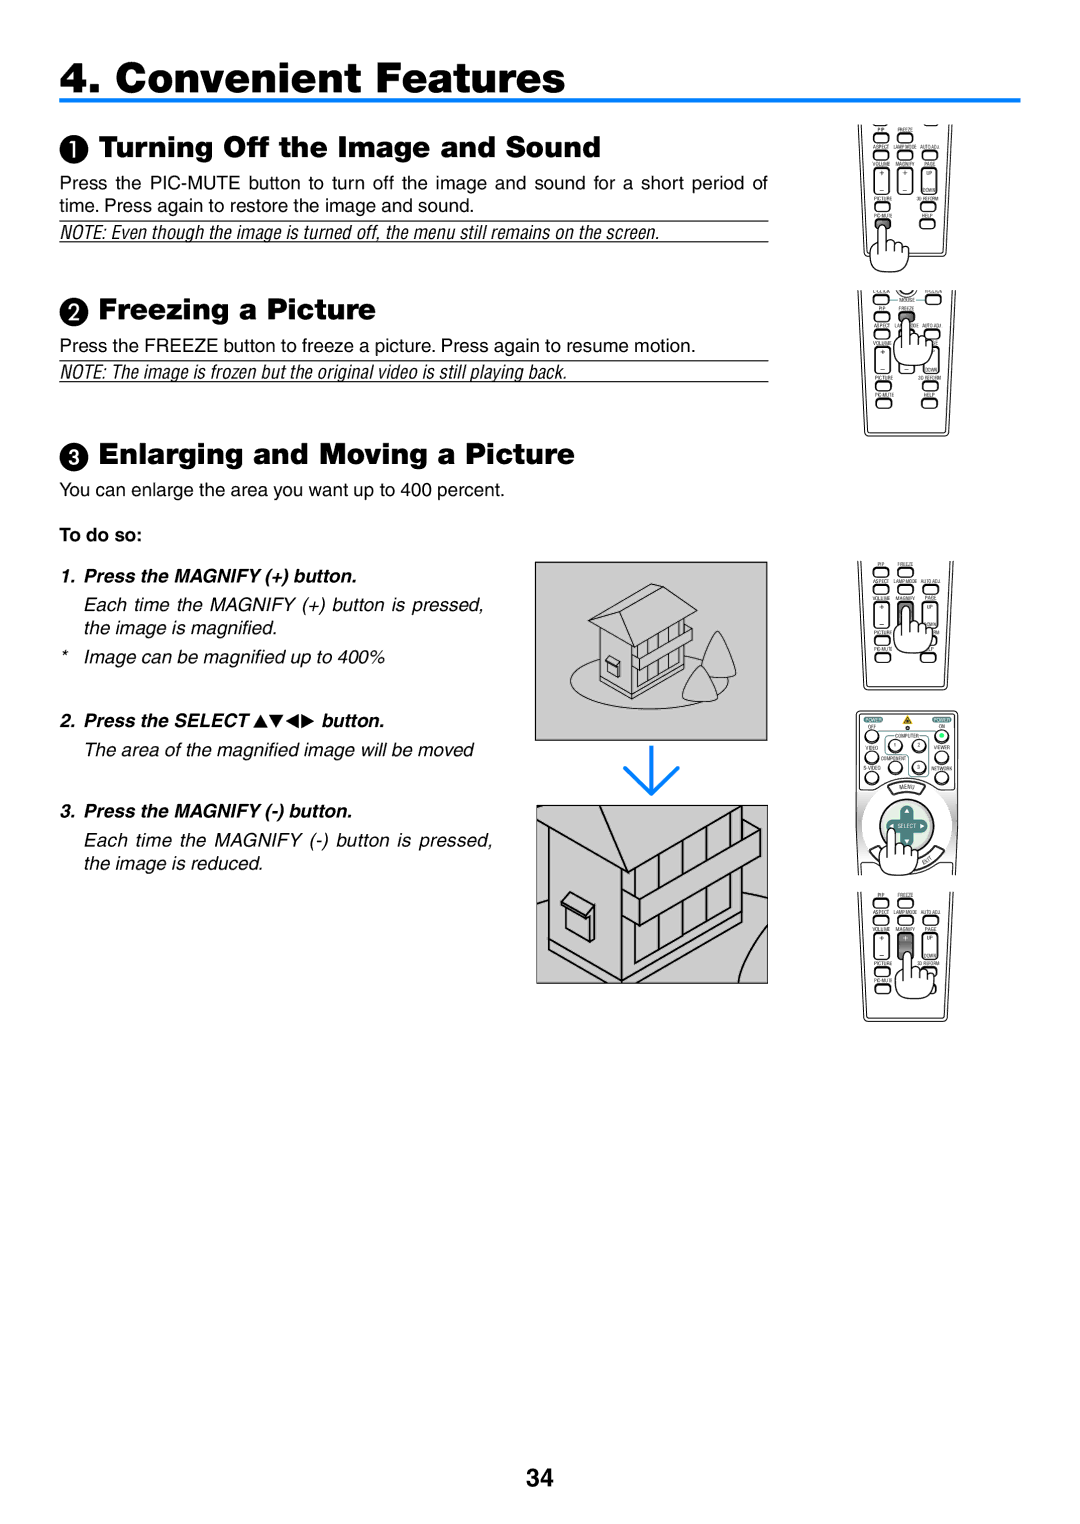 NEC NP1150, NP2150 user manual  Turning Off the Image and Sound,  Freezing a Picture,  Enlarging and Moving a Picture 